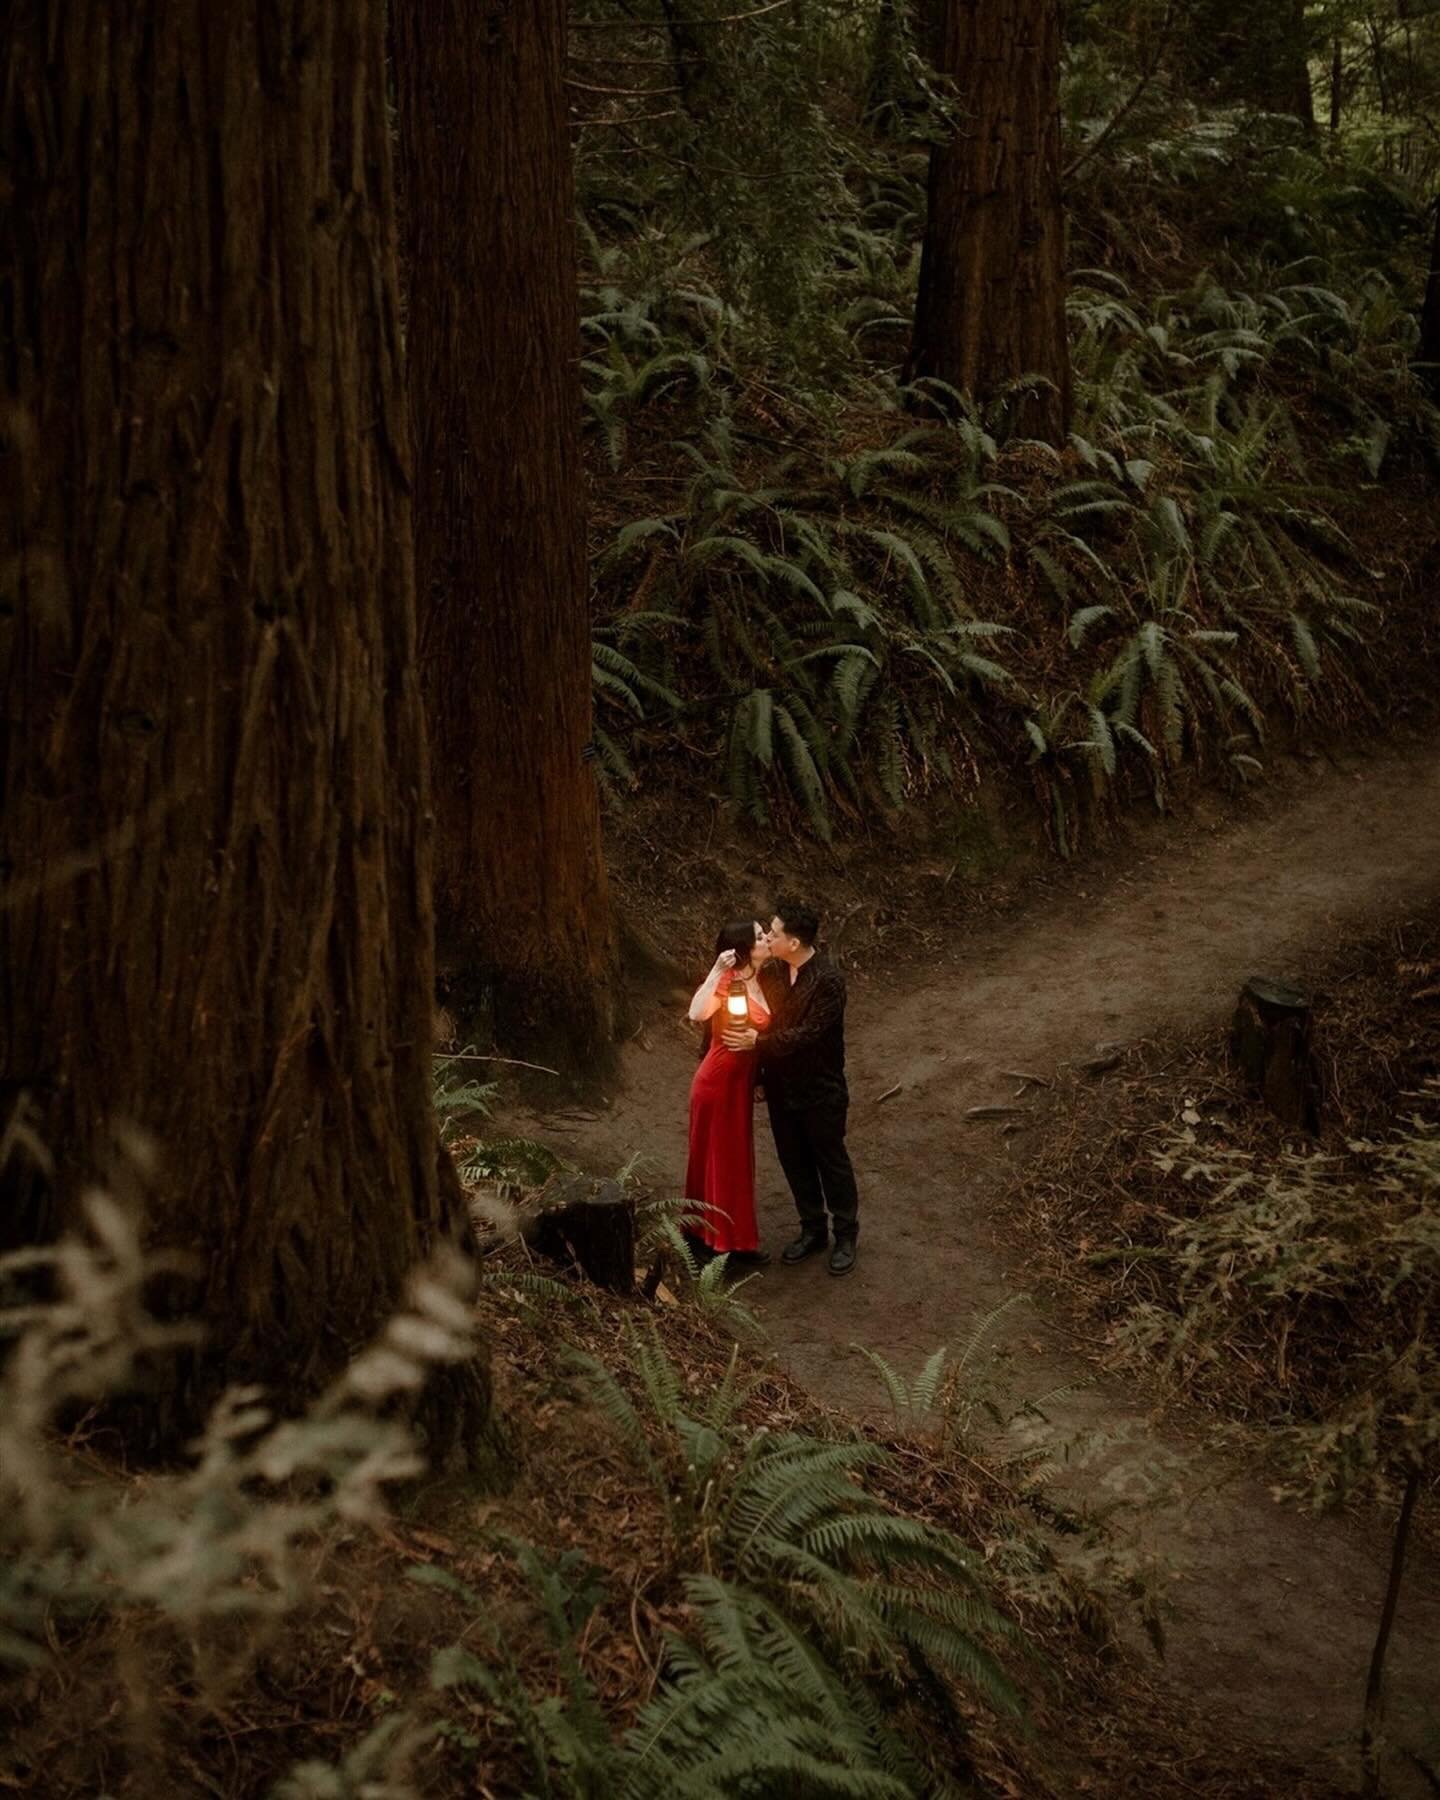 Tara, Kimo &amp; the magic of Hoyt Arboretum🌲✨🕯️✨&hearts;️

These two are such a vibe and were the most amazing subjects in one of my favorite forests in the city. I will never tire of taking photos amongst the stunning redwood trees and soaking up